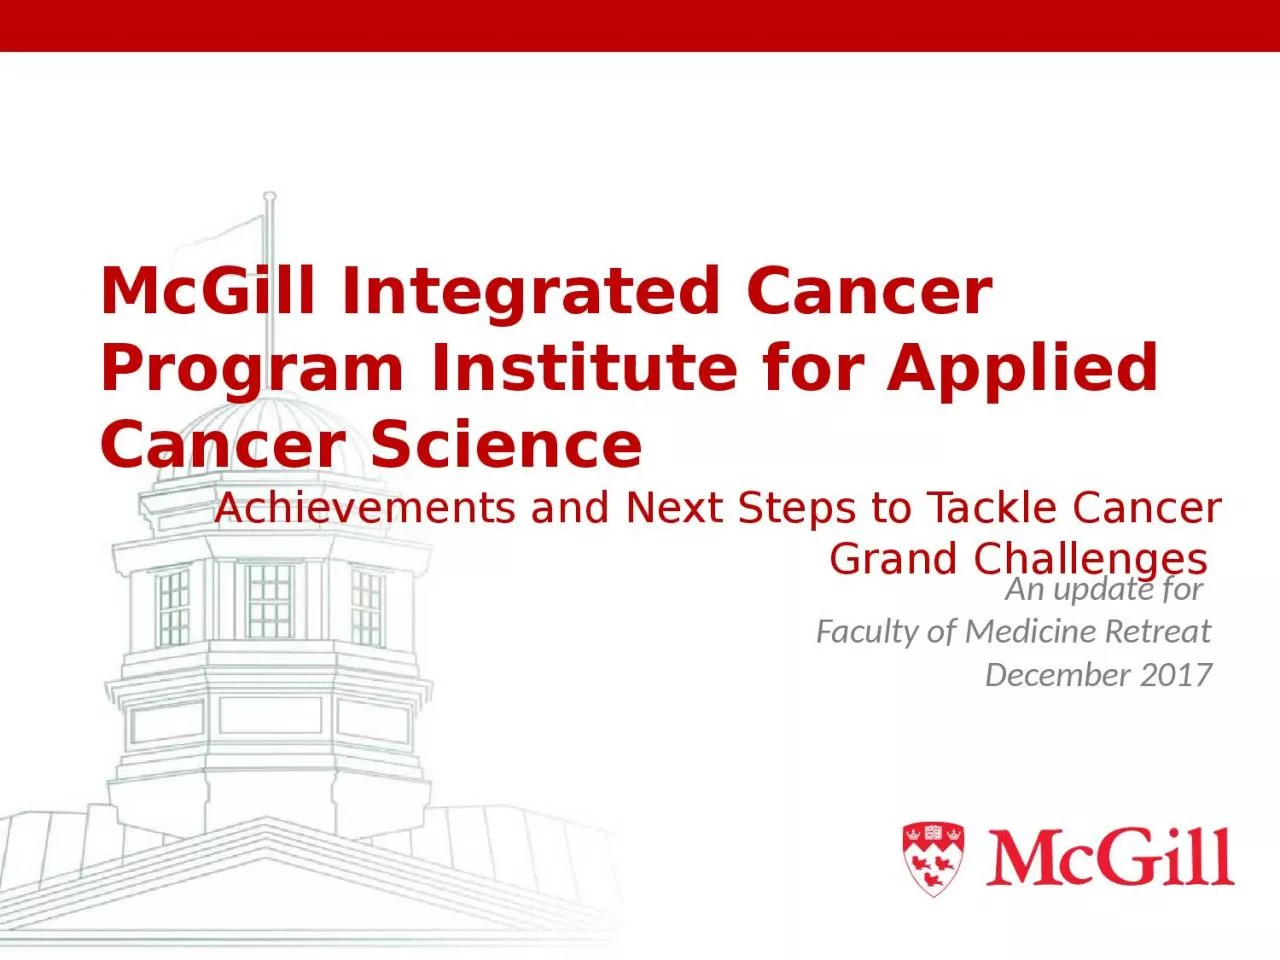 McGill Integrated Cancer Program Institute for Applied Cancer Science